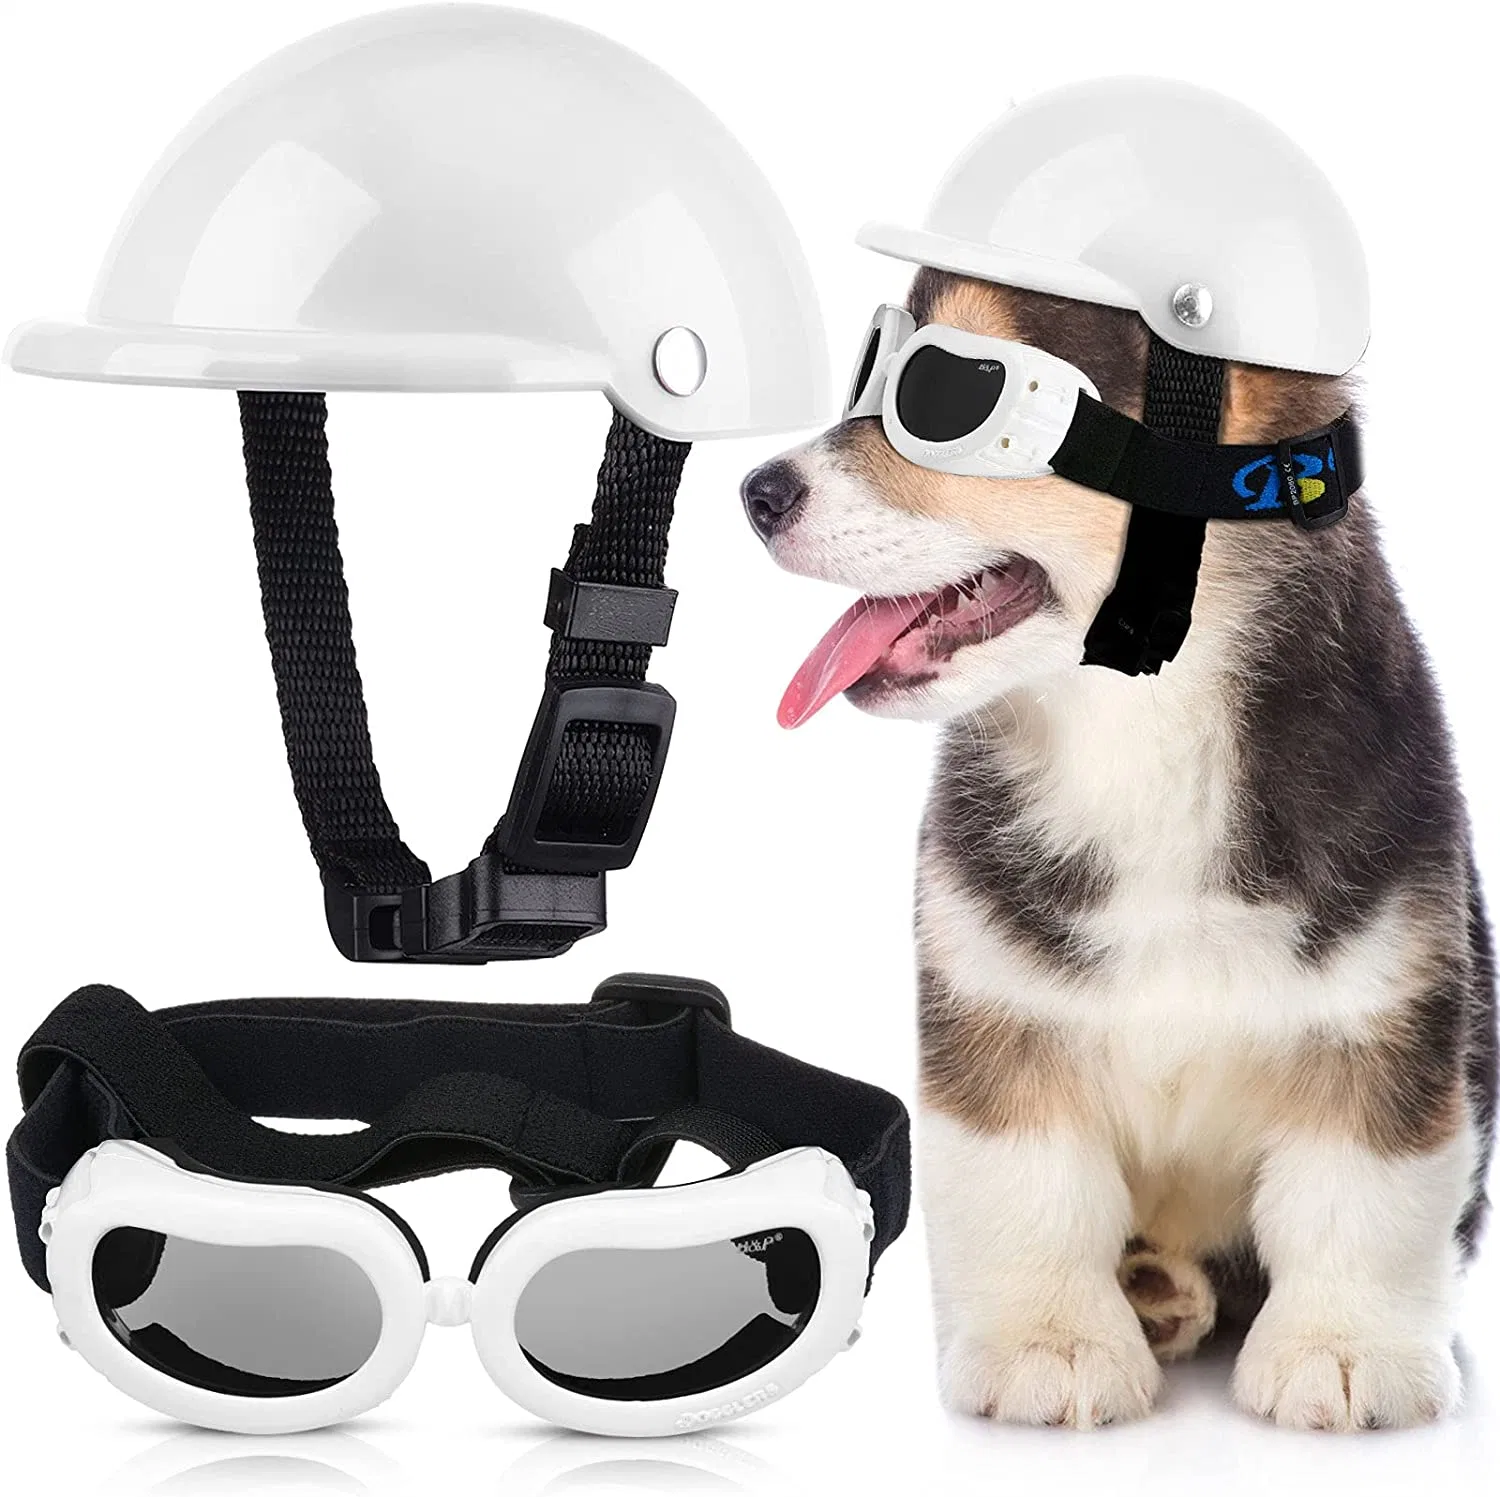 Soft and Reliable Pet Cap Hard Safety Hat